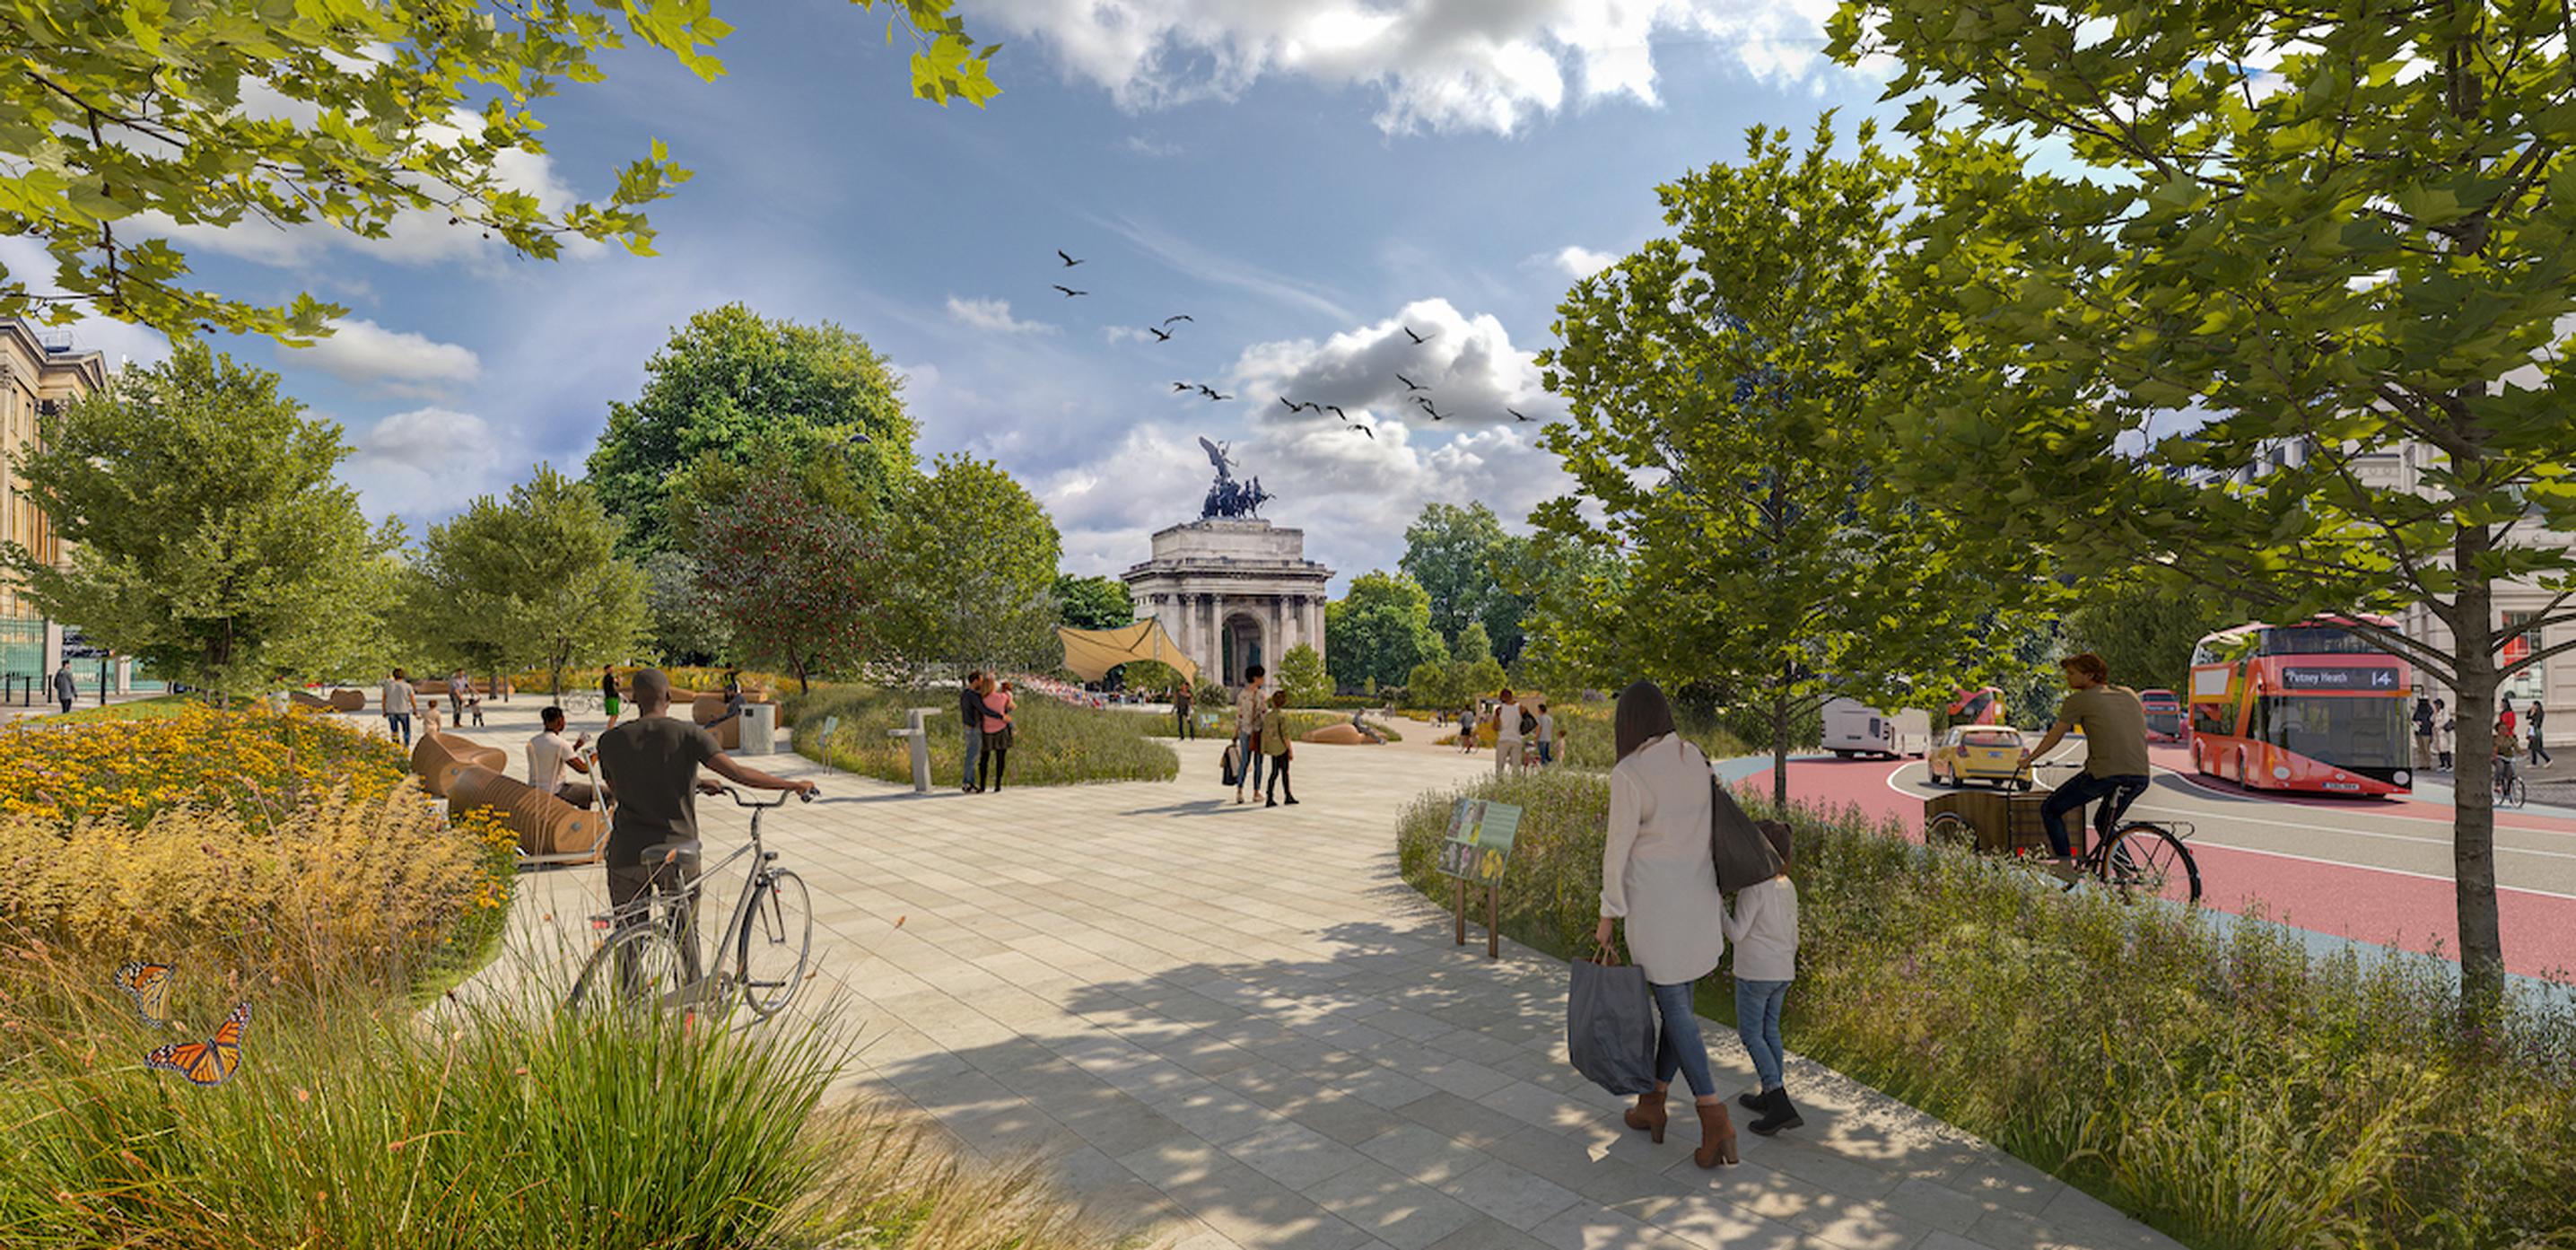 Possible asked Londoners whether they would support the pedestrianisation of Hyde Park Corner to link it up with Green Park. Support for the idea rose from 48% to 72% after the concept was co-designed with stakeholders and presented as an image